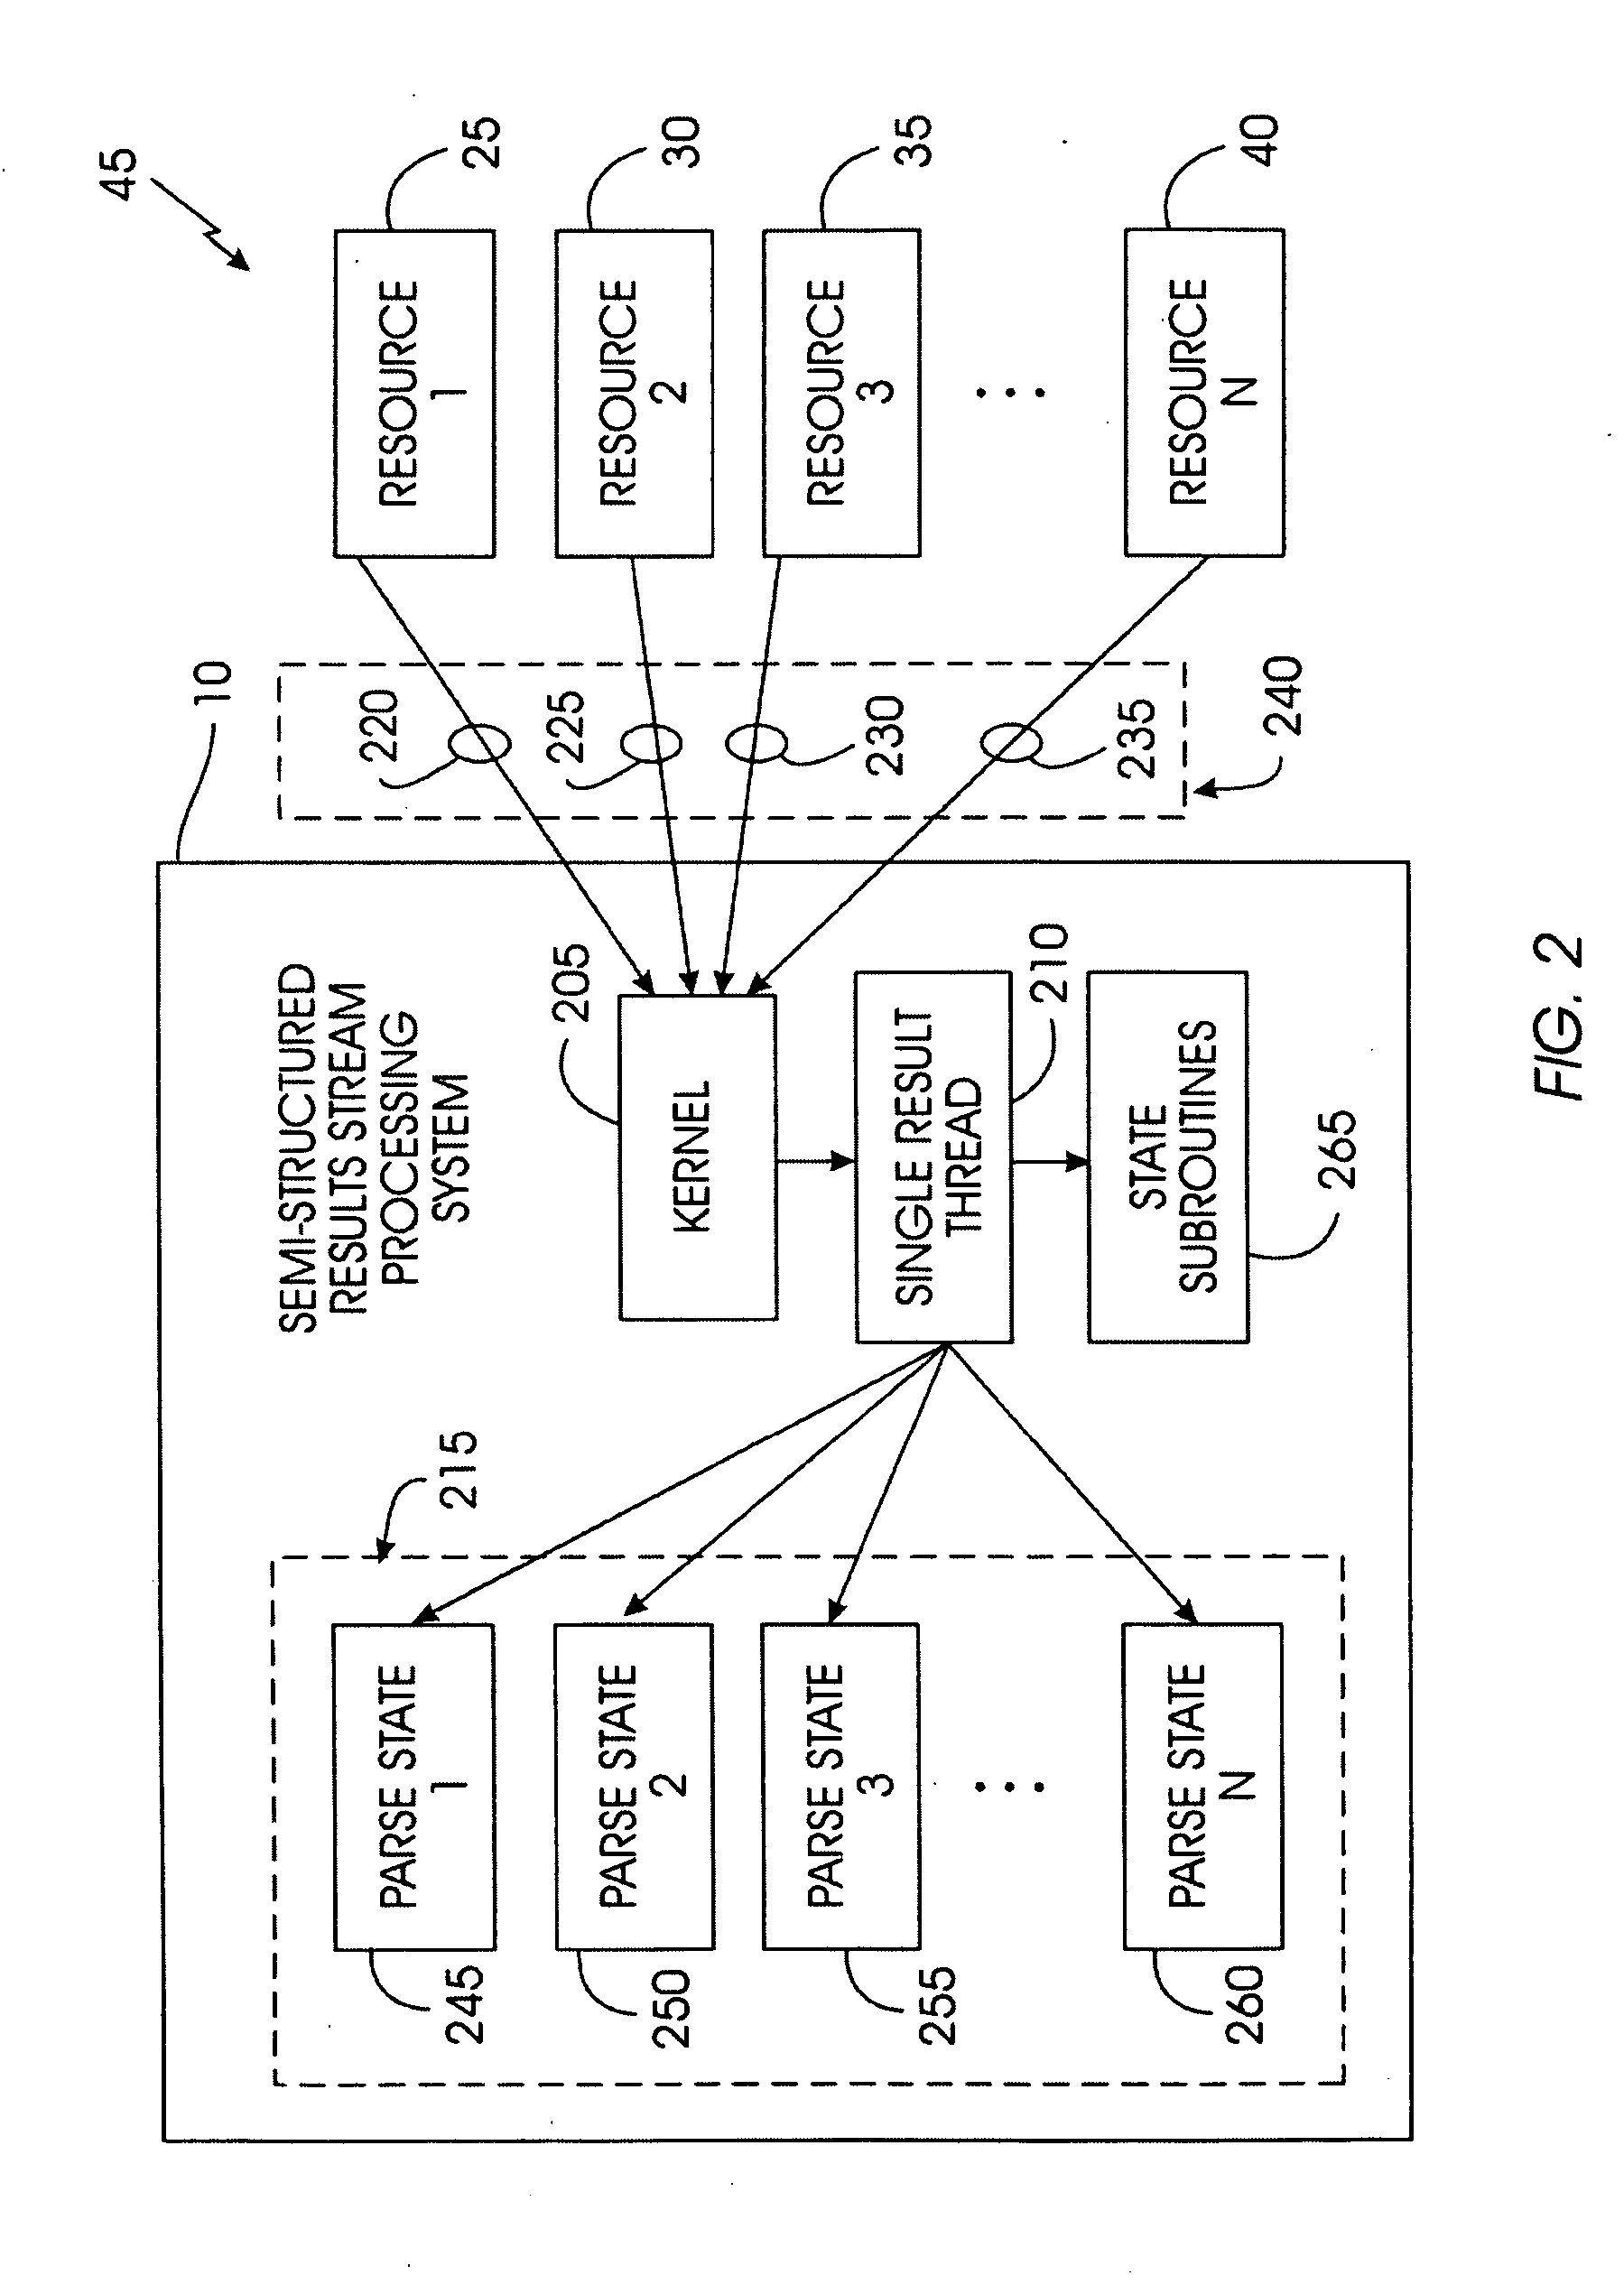 System and method for bulk processing of semi-structured result streams from multiple resources